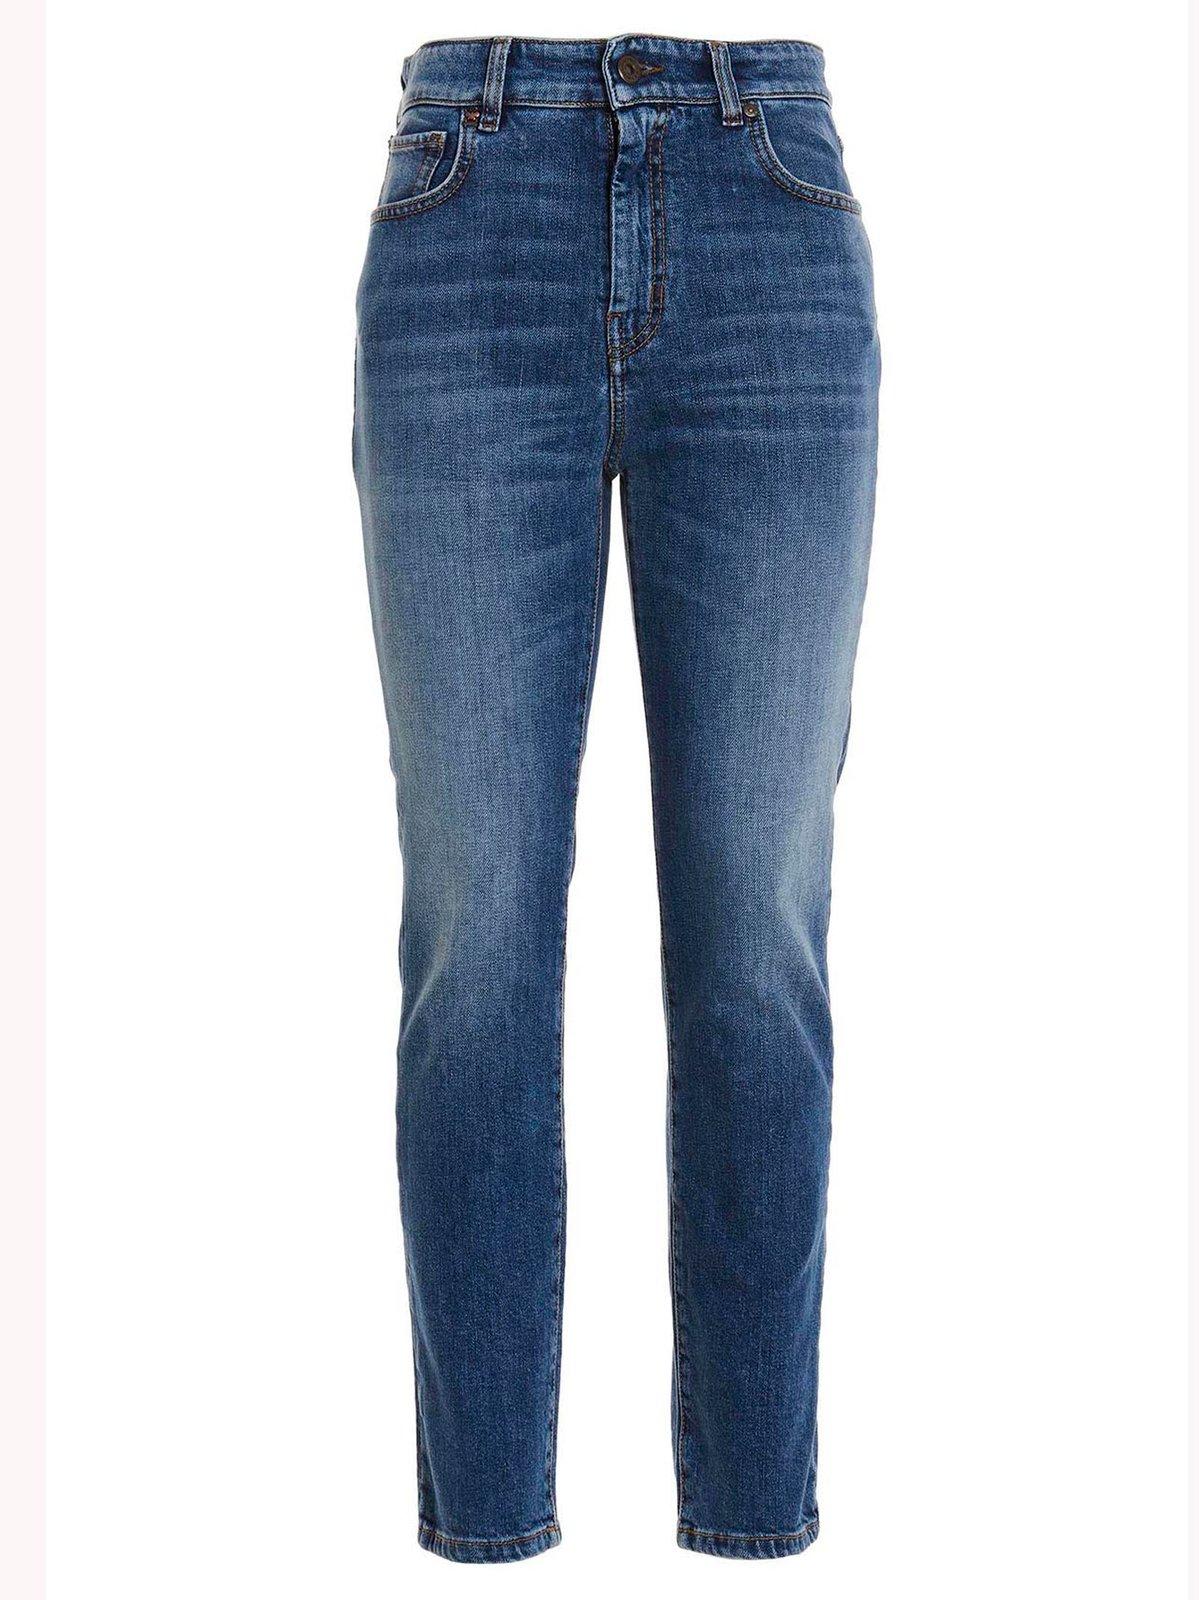 Weekend Max Mara Straight-fit Cropped Jeans